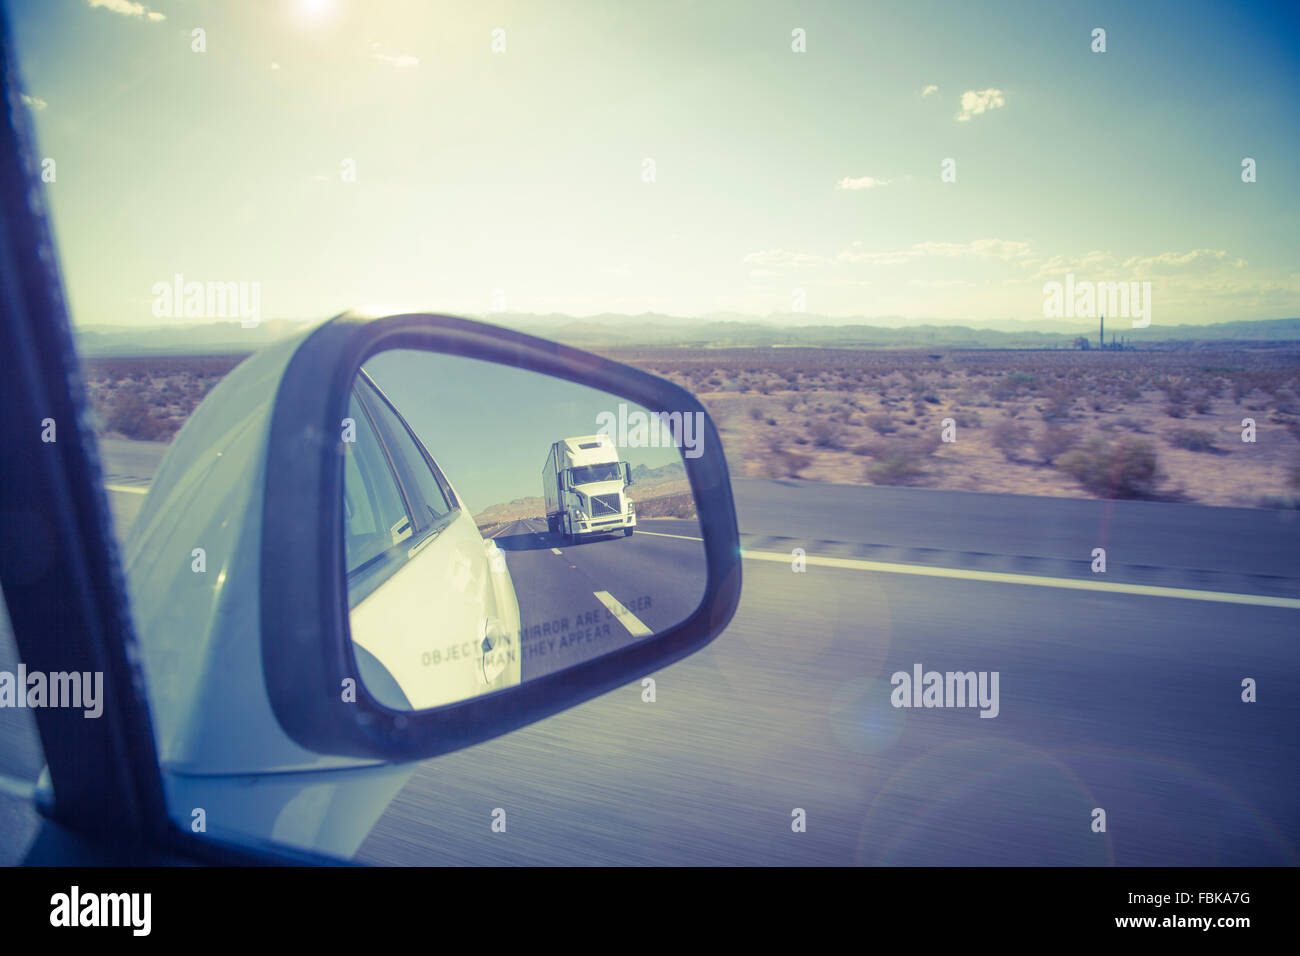 Reflection of large truck in wing mirror on US freeway. Stock Photo